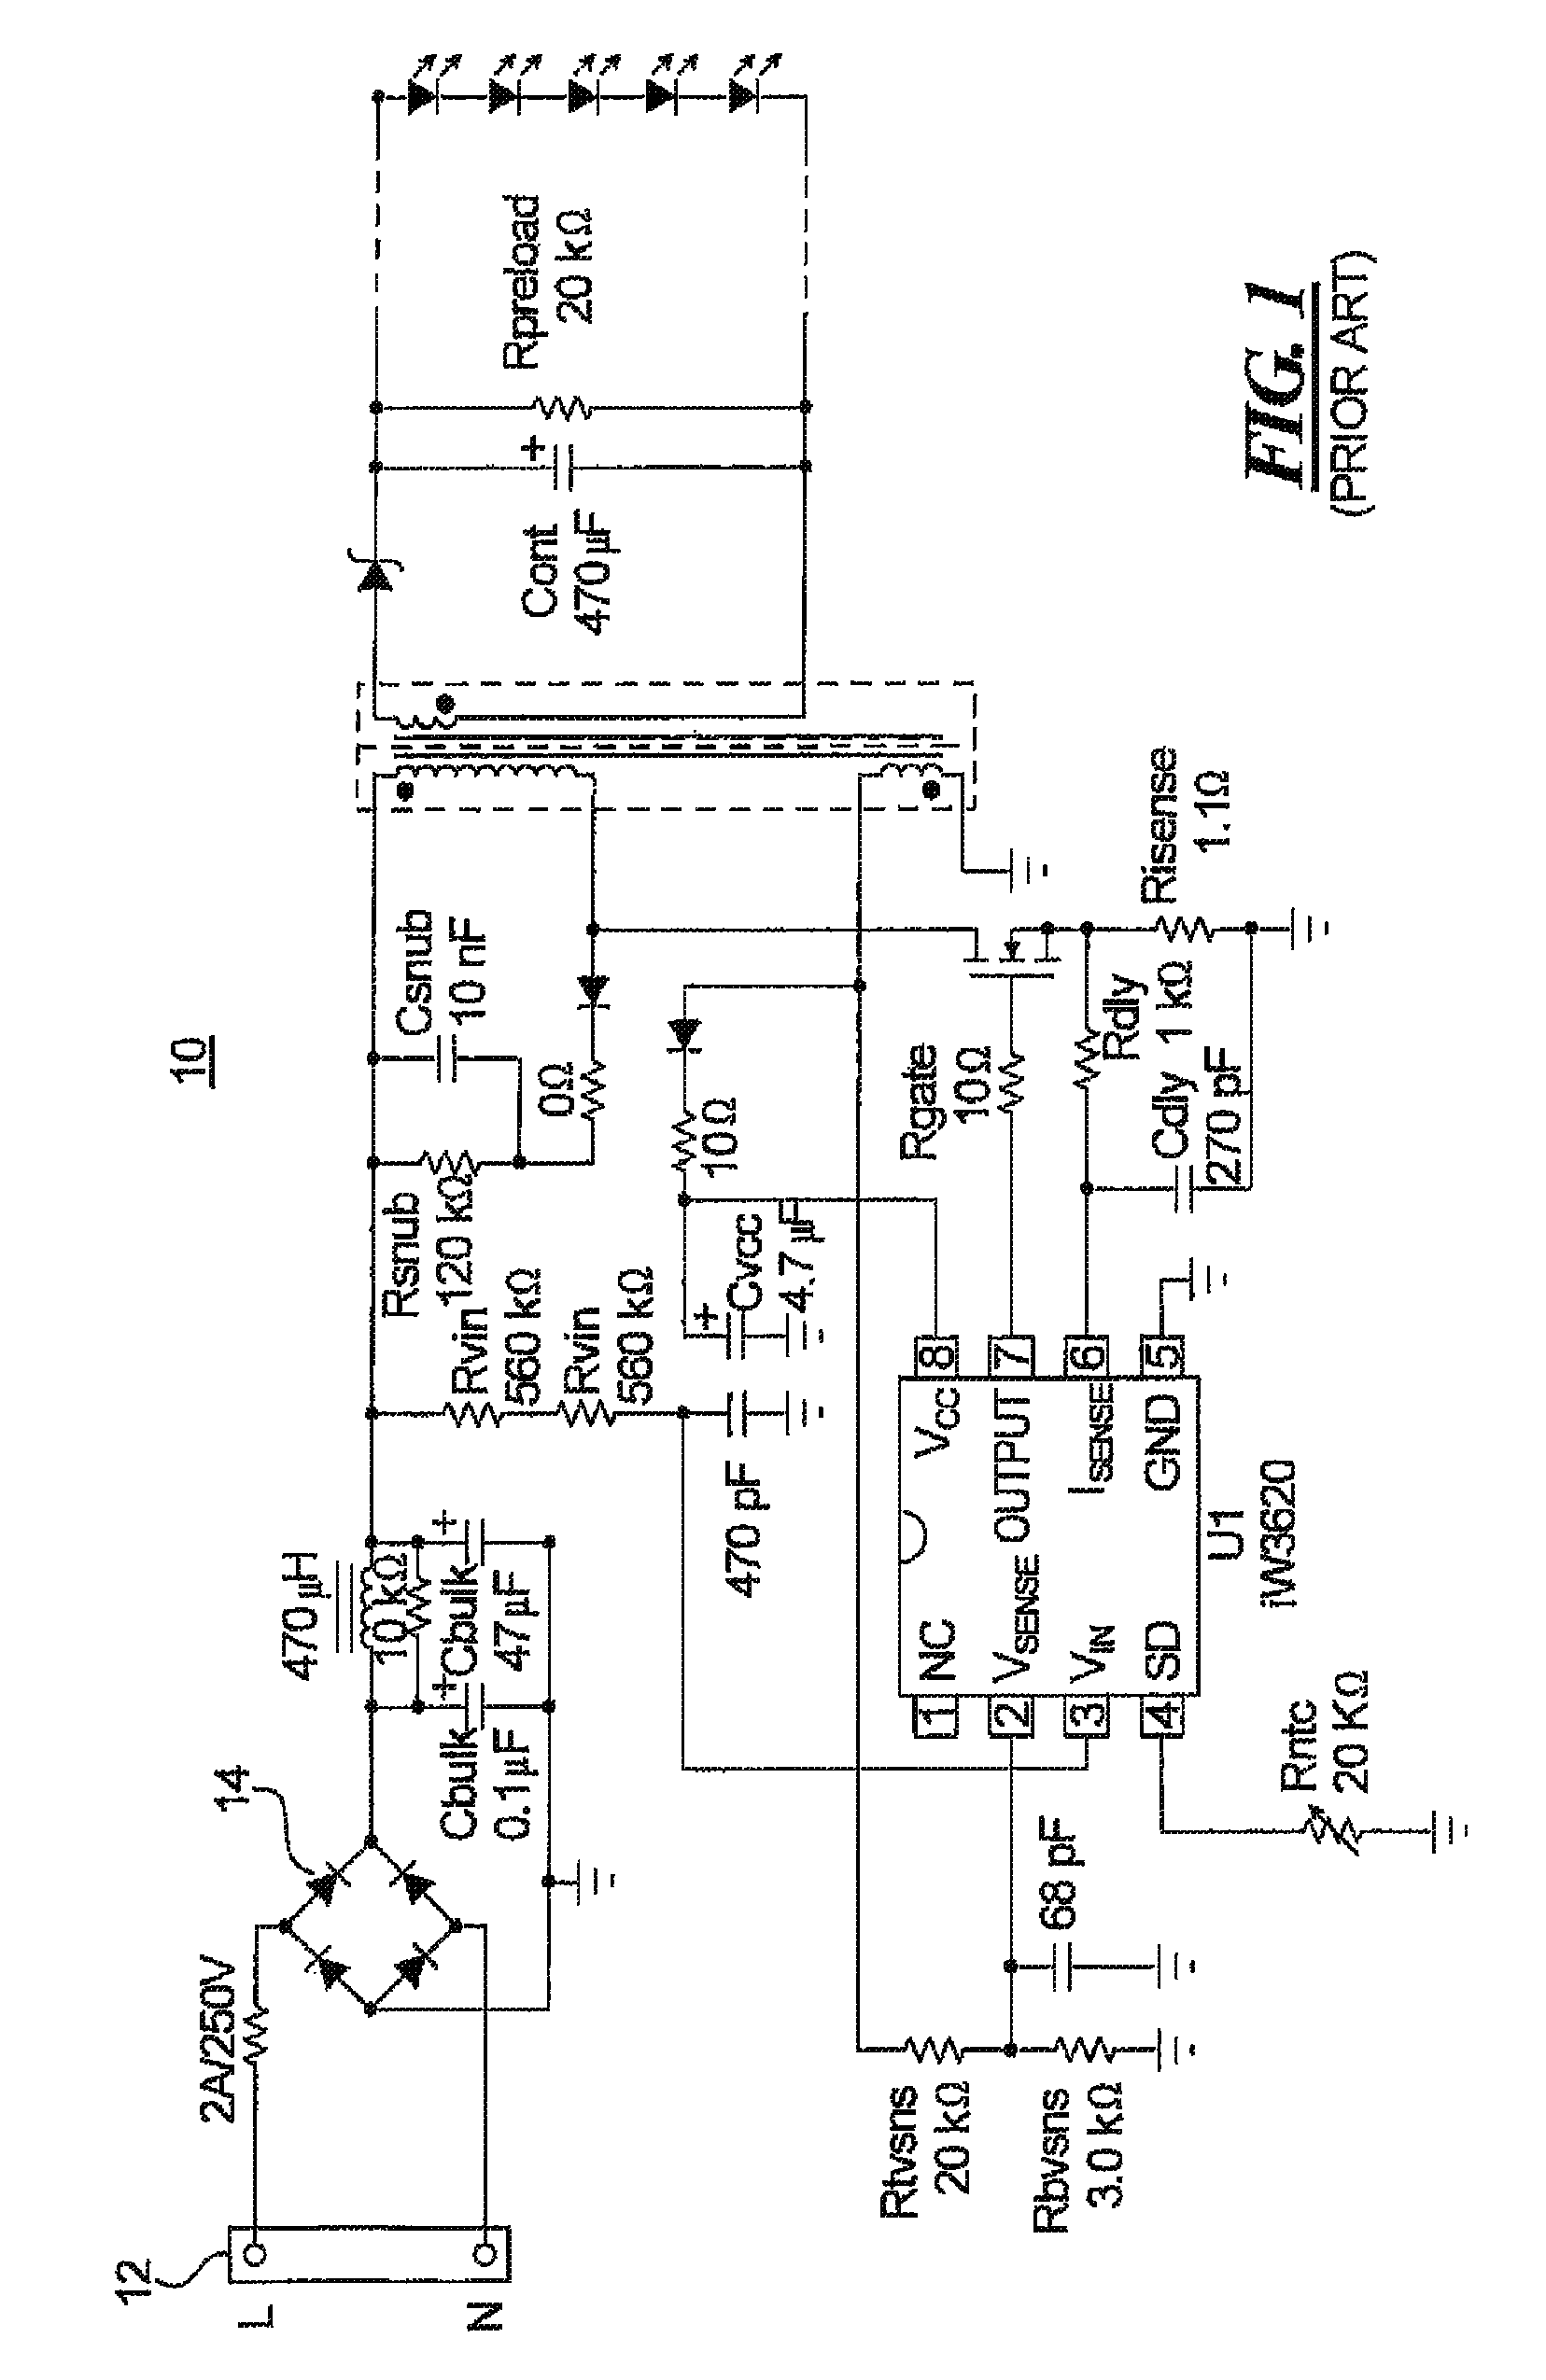 Method and arrangement for remotely driving light emitting diodes from a three-phase power source via a single phase cable system